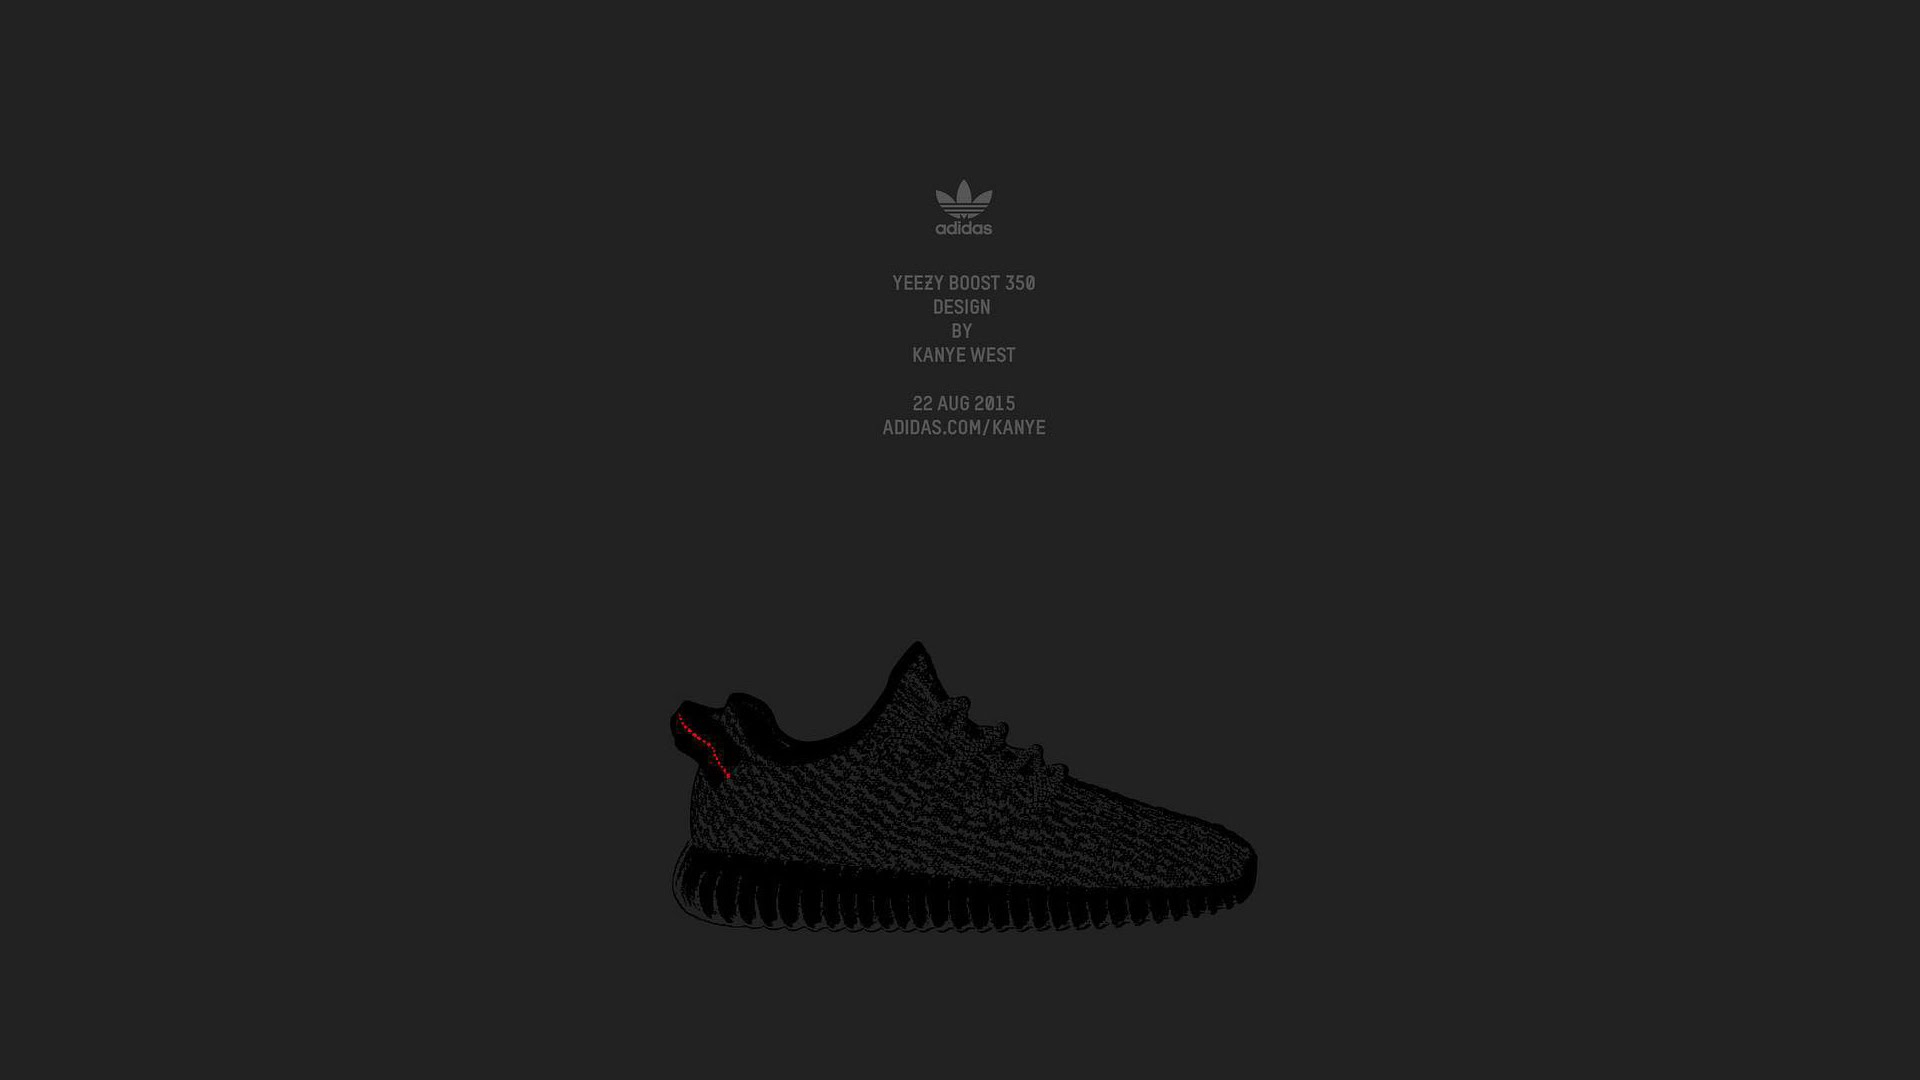 Adidas Yeezy Boost 350 V2 Wallpapers